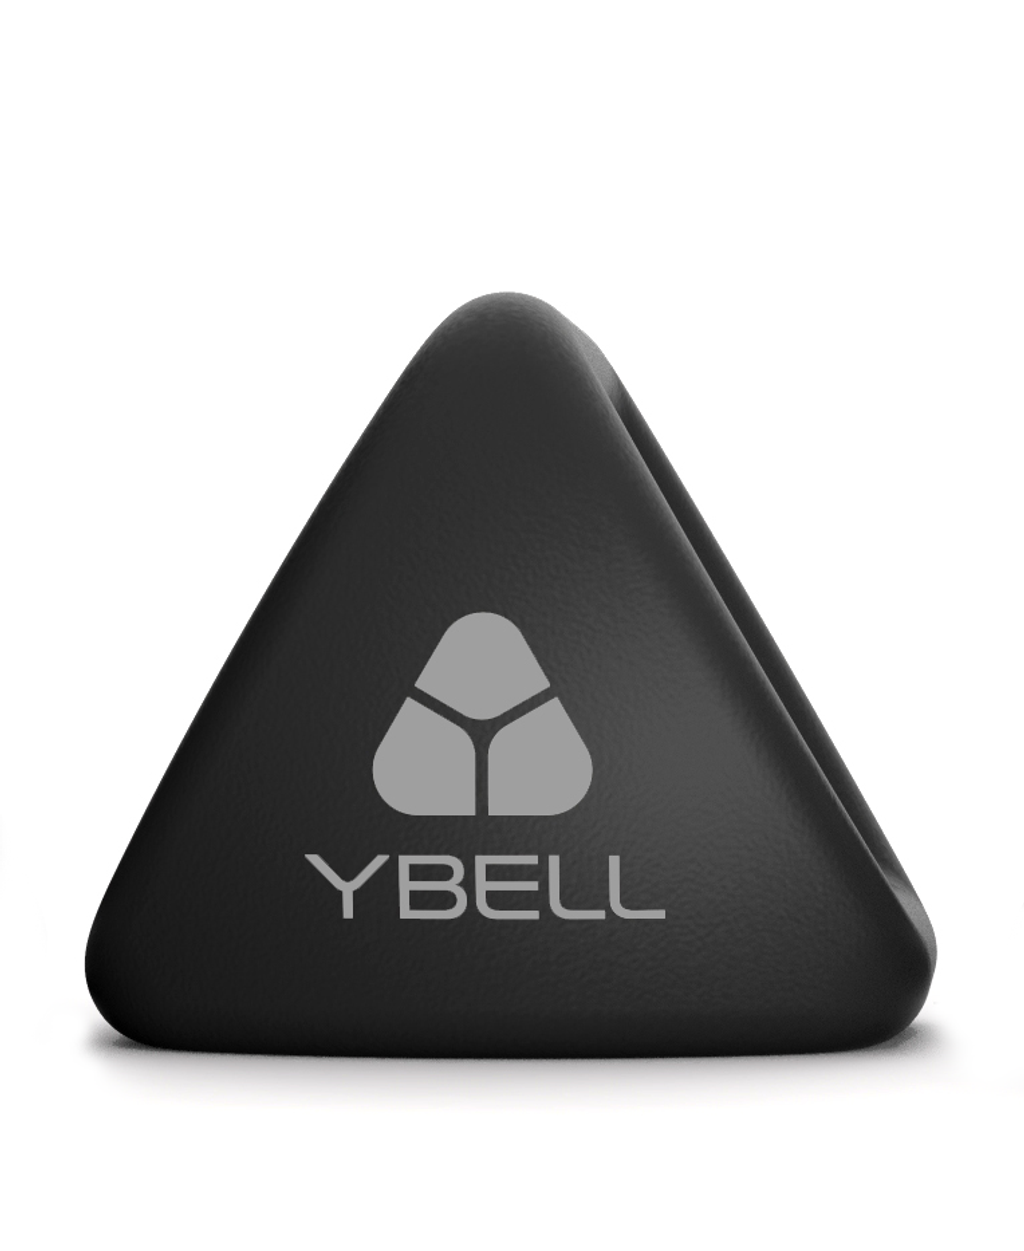 YBell-Neo-4-in-1-Tool_Dumbbell_Kettlebell_Medicine Ball_Push-up Stand